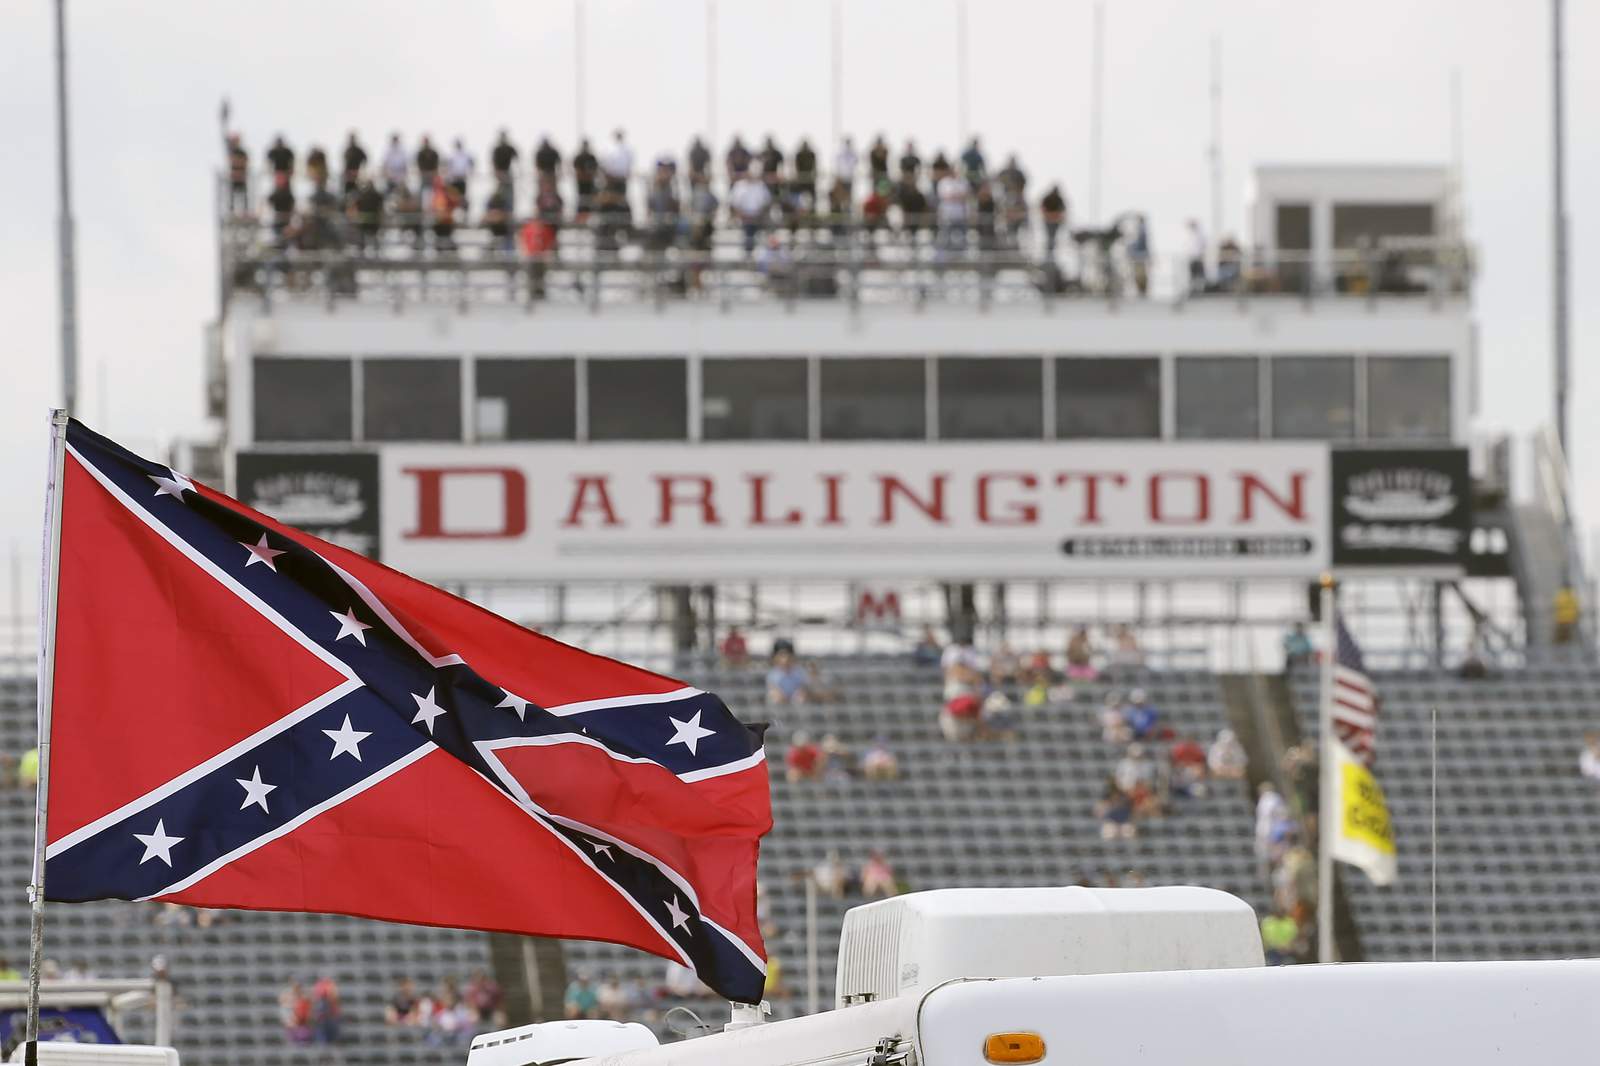 NASCAR driver Ray Ciccarelli quitting after sport bans Confederate flag from its races, venues